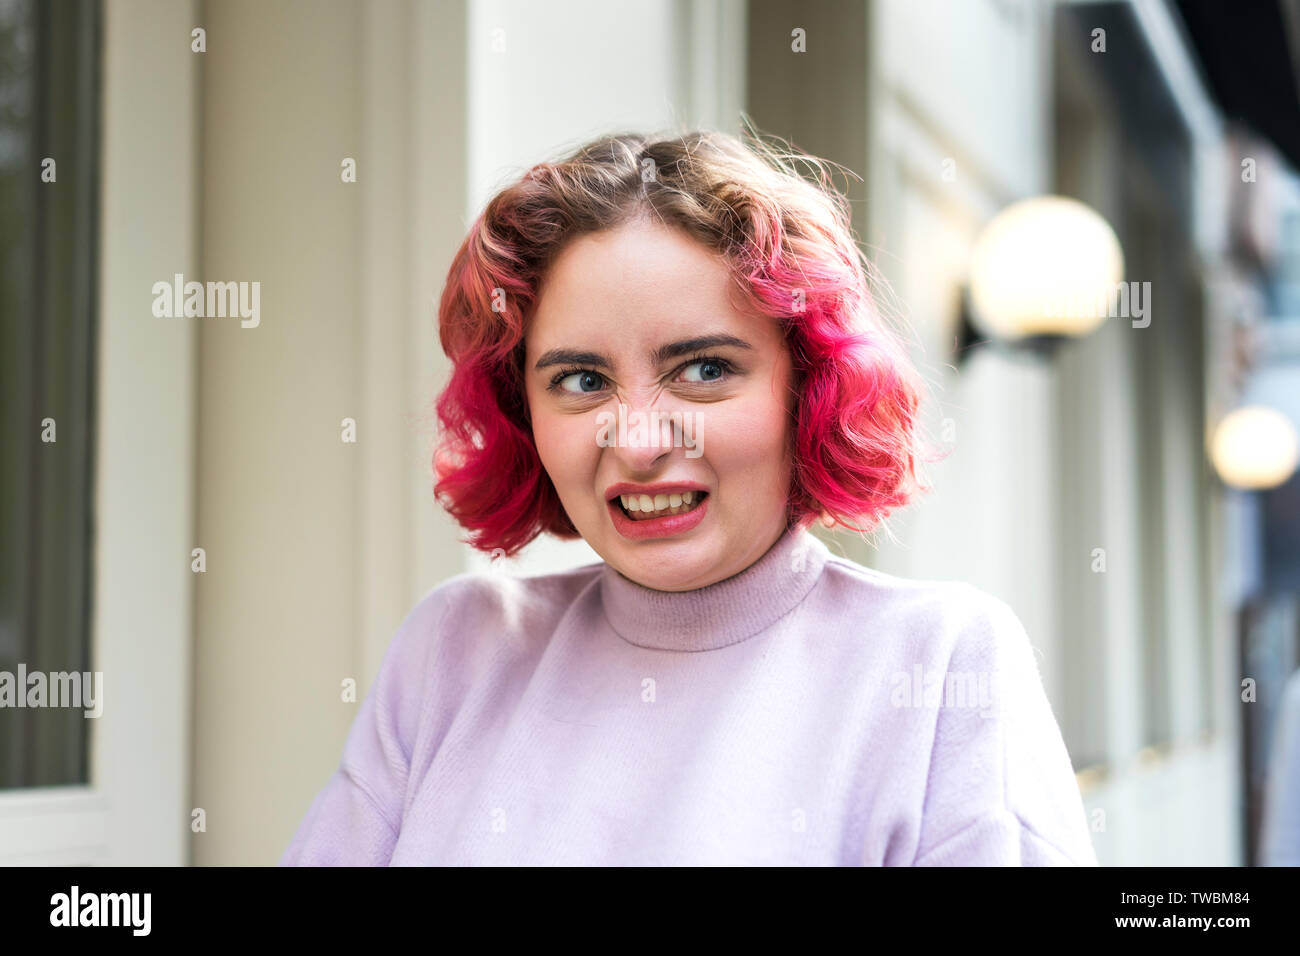 Emotional young woman with pink wavy hair with a grimace of neglect or anger Stock Photo